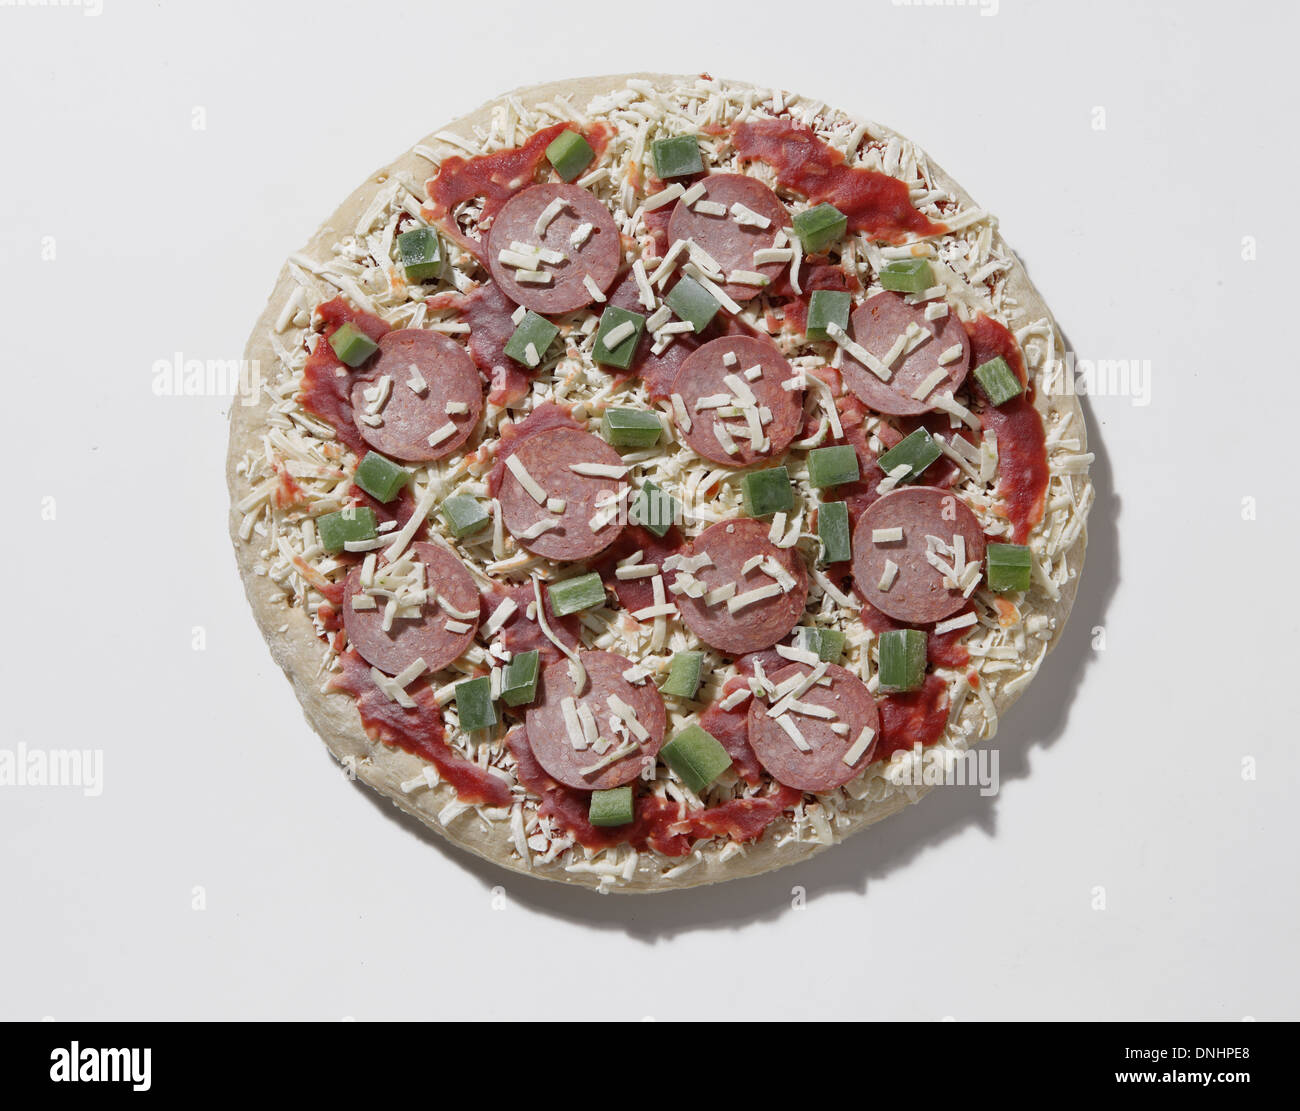 A round uncooked frozen pizza. Stock Photo